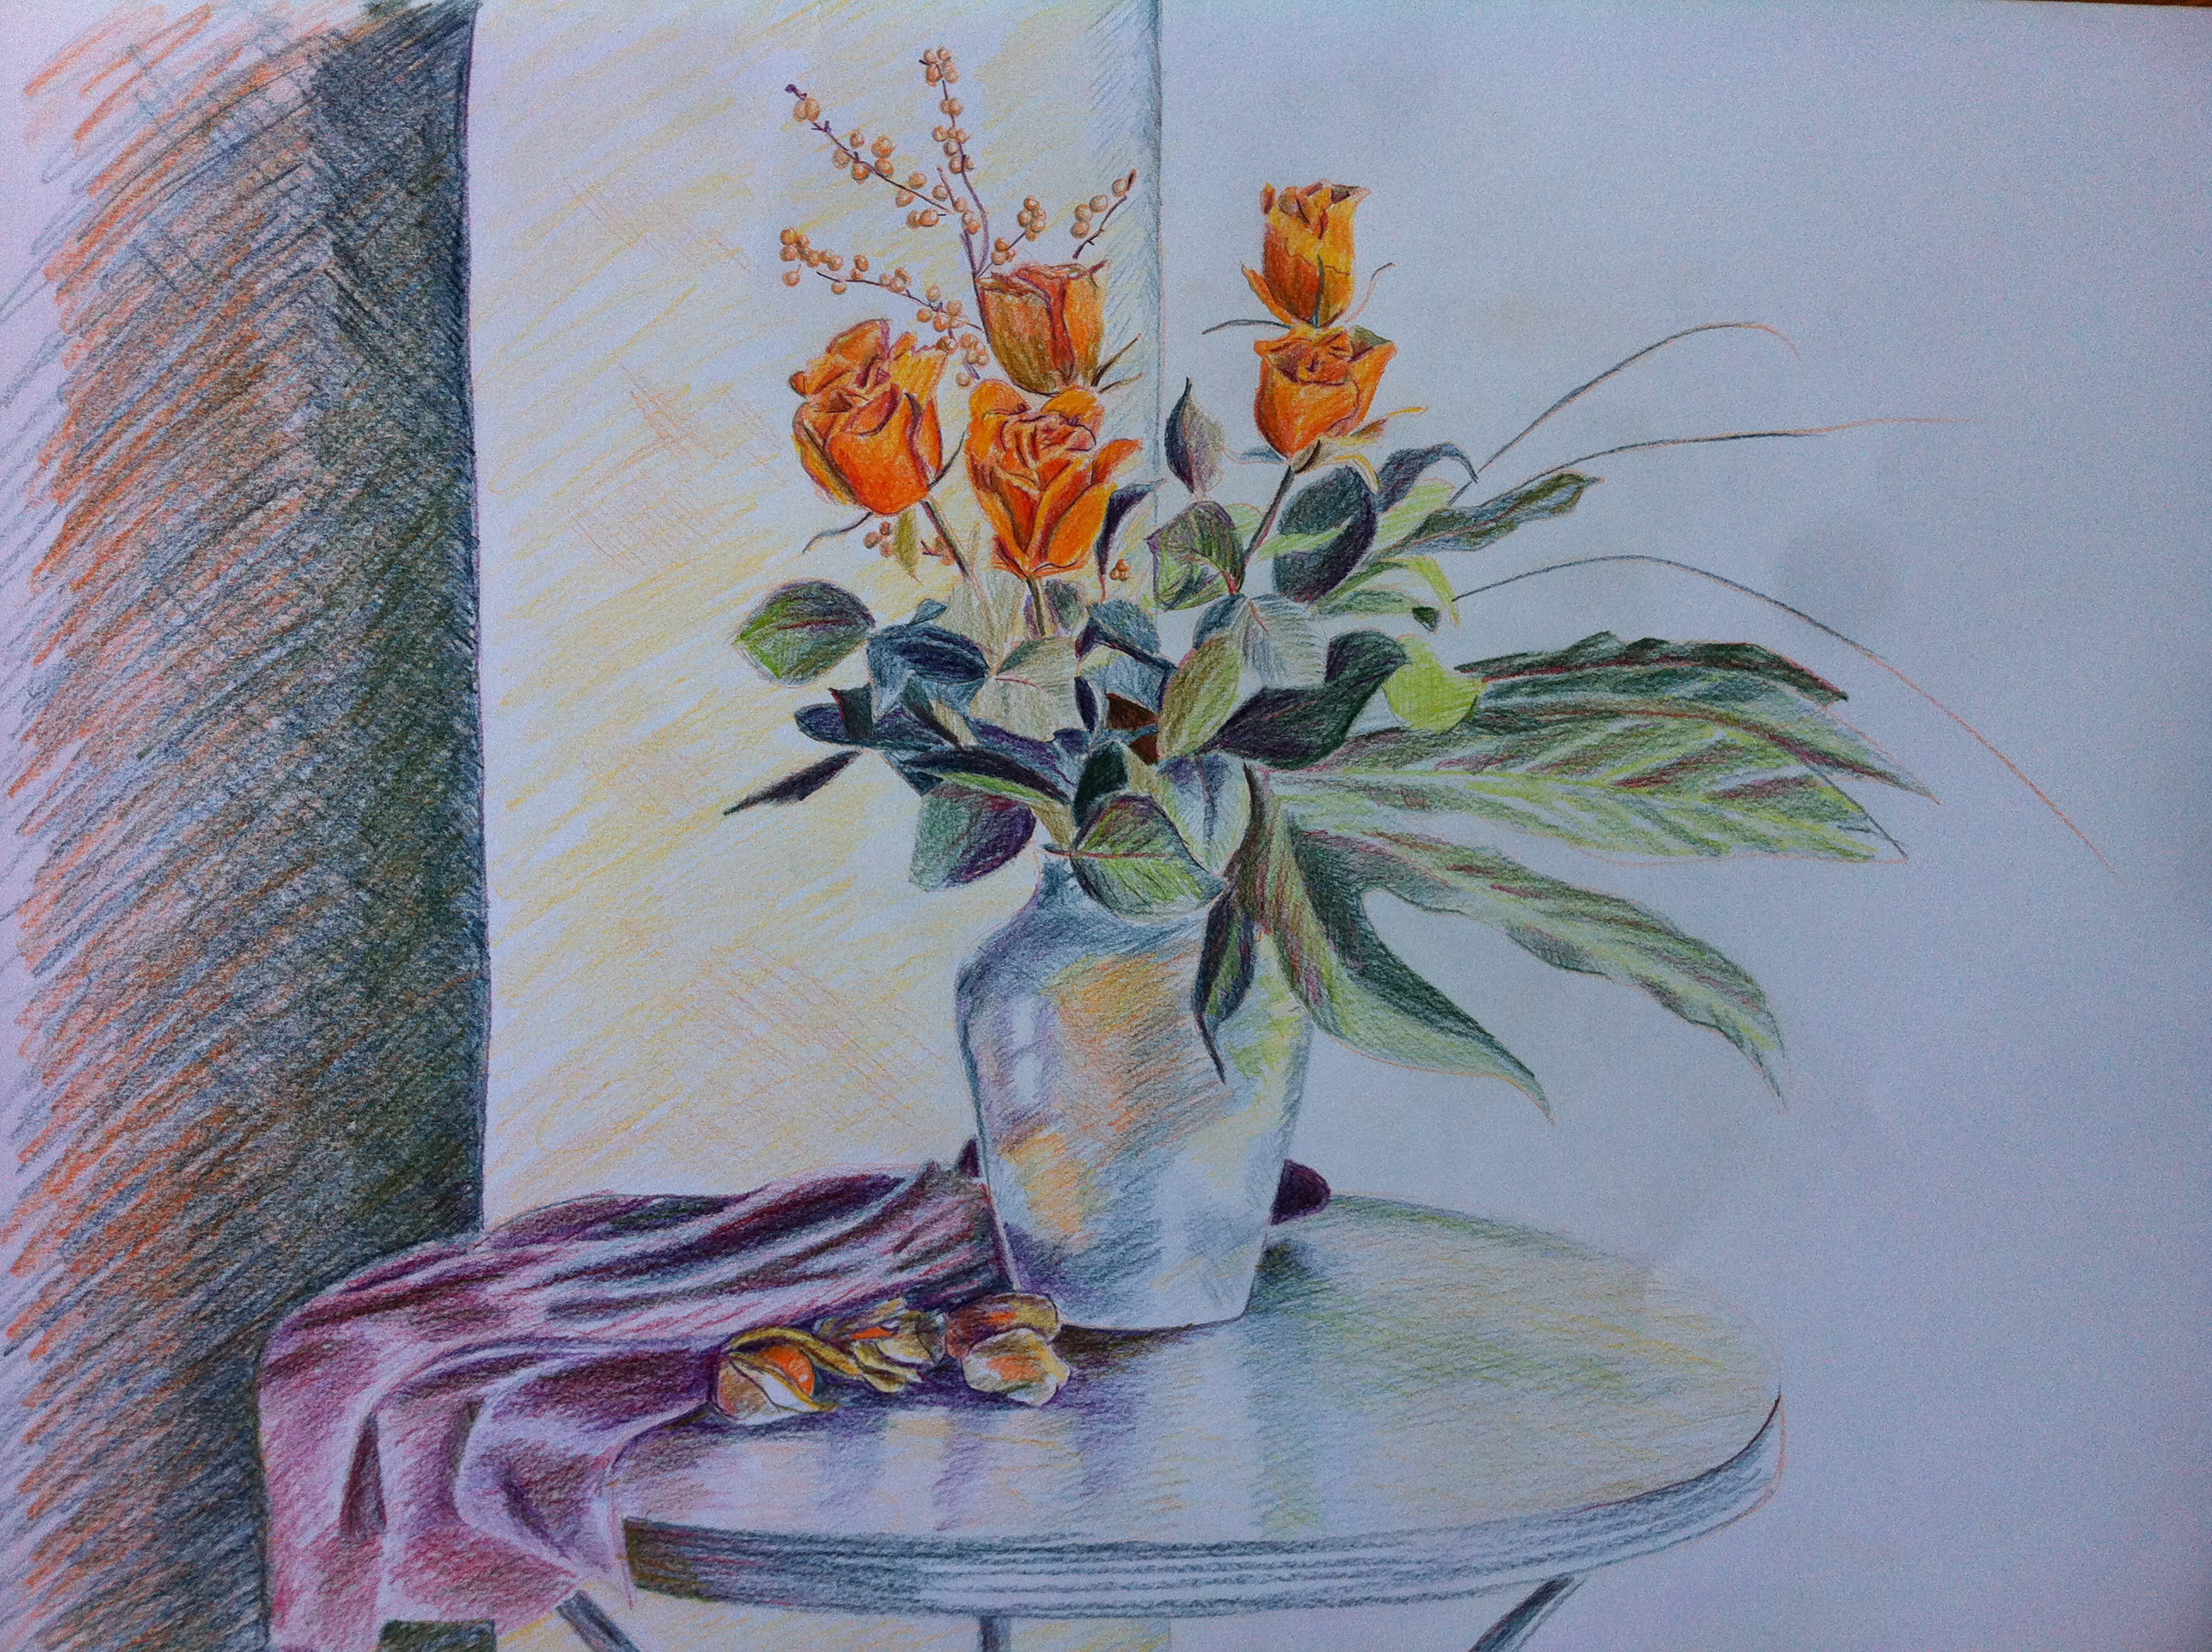 Colour Drawing Pictures Of Flowers at PaintingValley.com | Explore